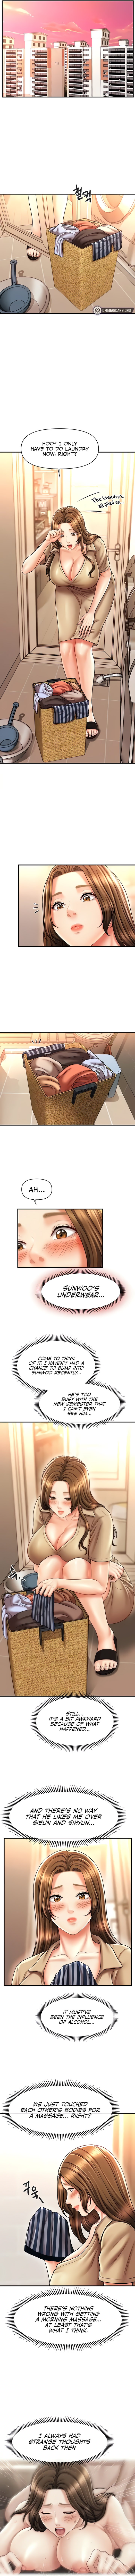 How to Conquer Women with Hypnosis - Chapter 18 Page 3